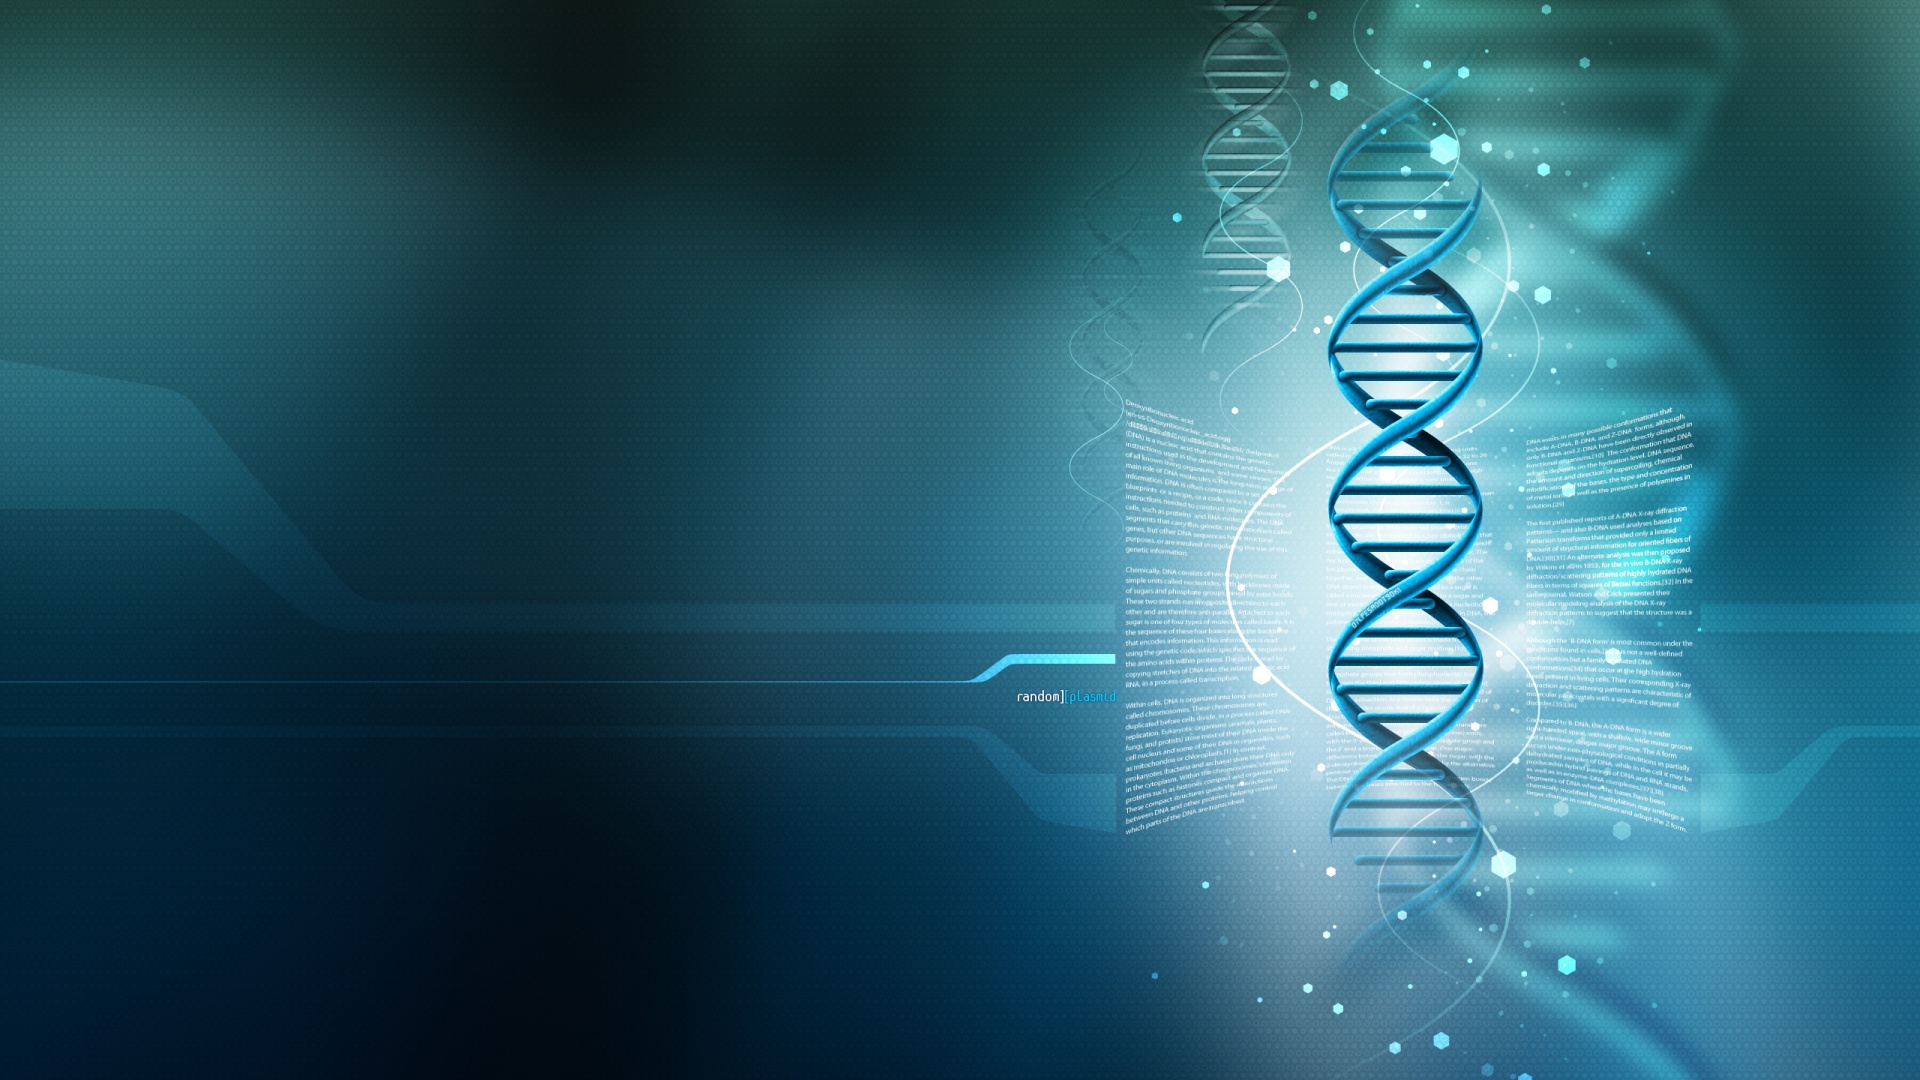 abstract wallpapers hd A4 dna